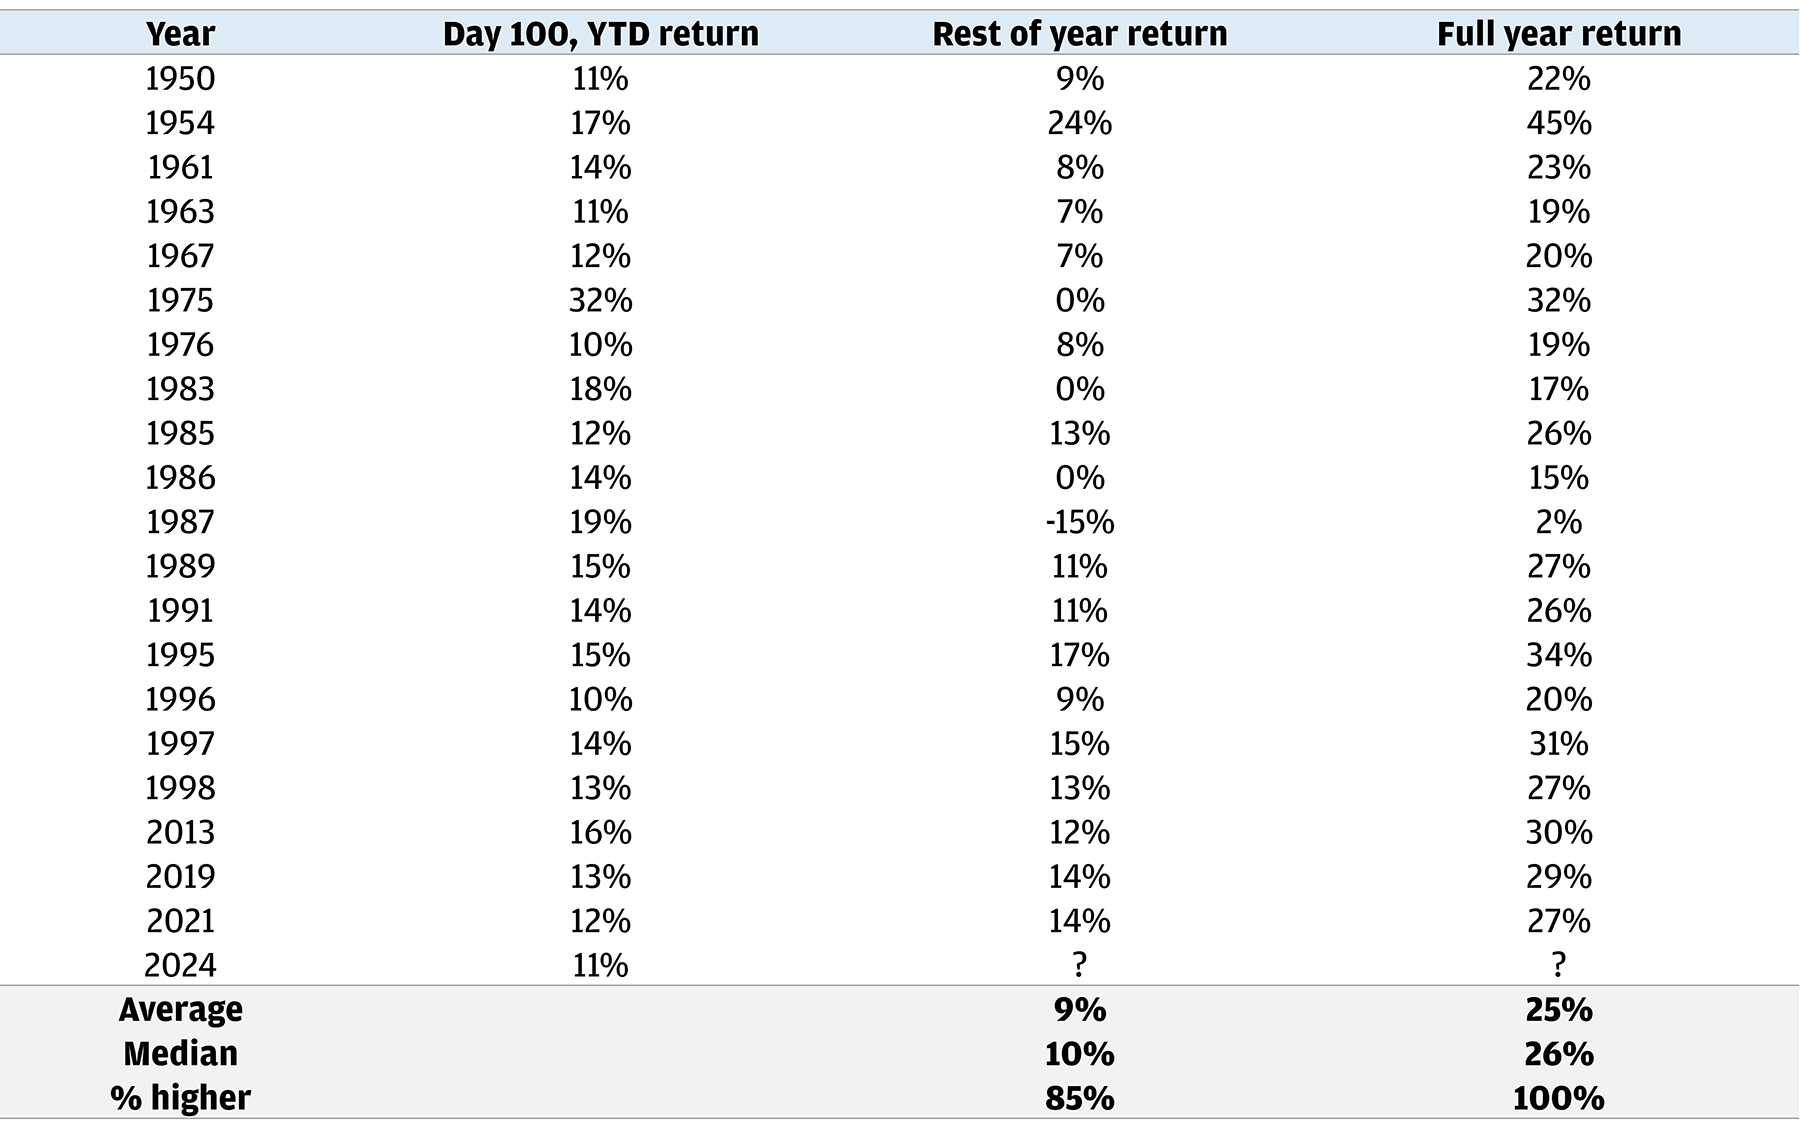 This table shows the S&P 500 Index returns in instances of a 10% rally that occurs 100 trading days into the year. The analysis is performed since 1950.